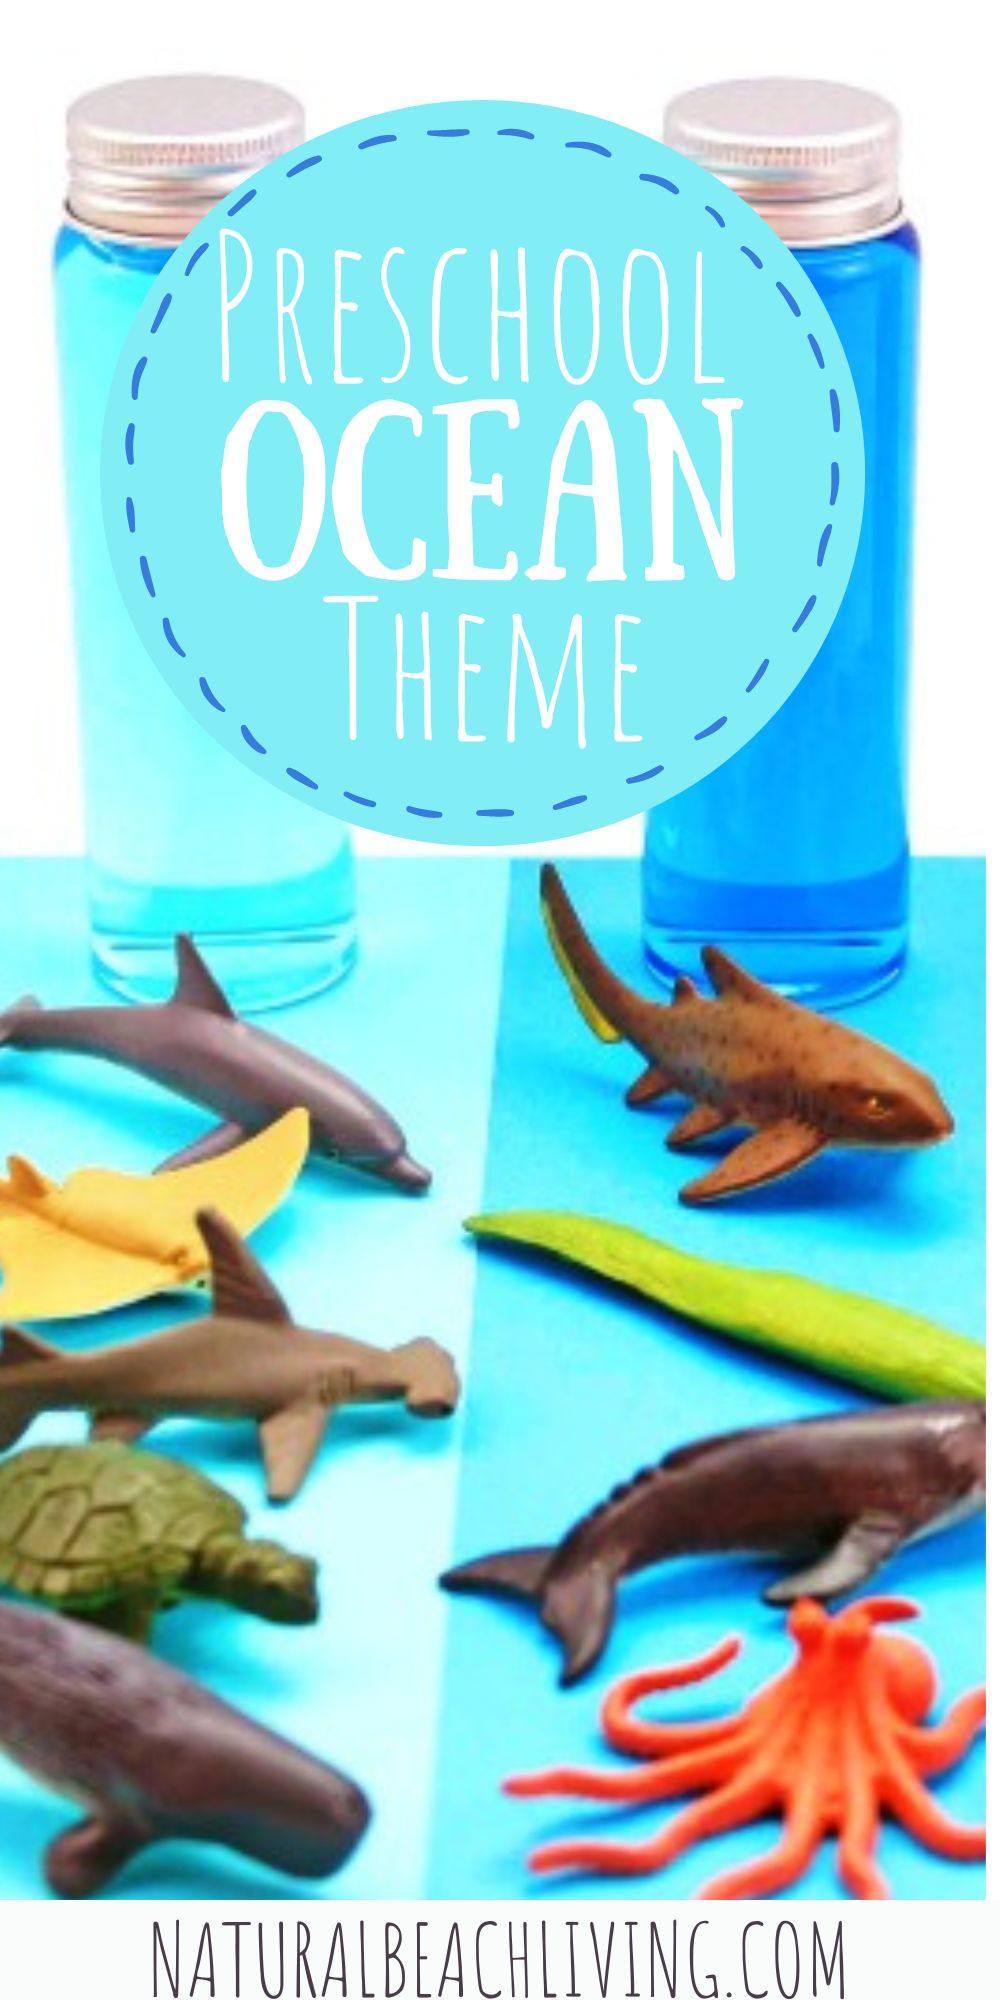 Check out all the fun under the sea activities and crafts you can do with an under the sea preschool theme this year. You'll love these favorite ocean books, under the sea crafts, under the sea snack ideas, and Ocean activities for kids!